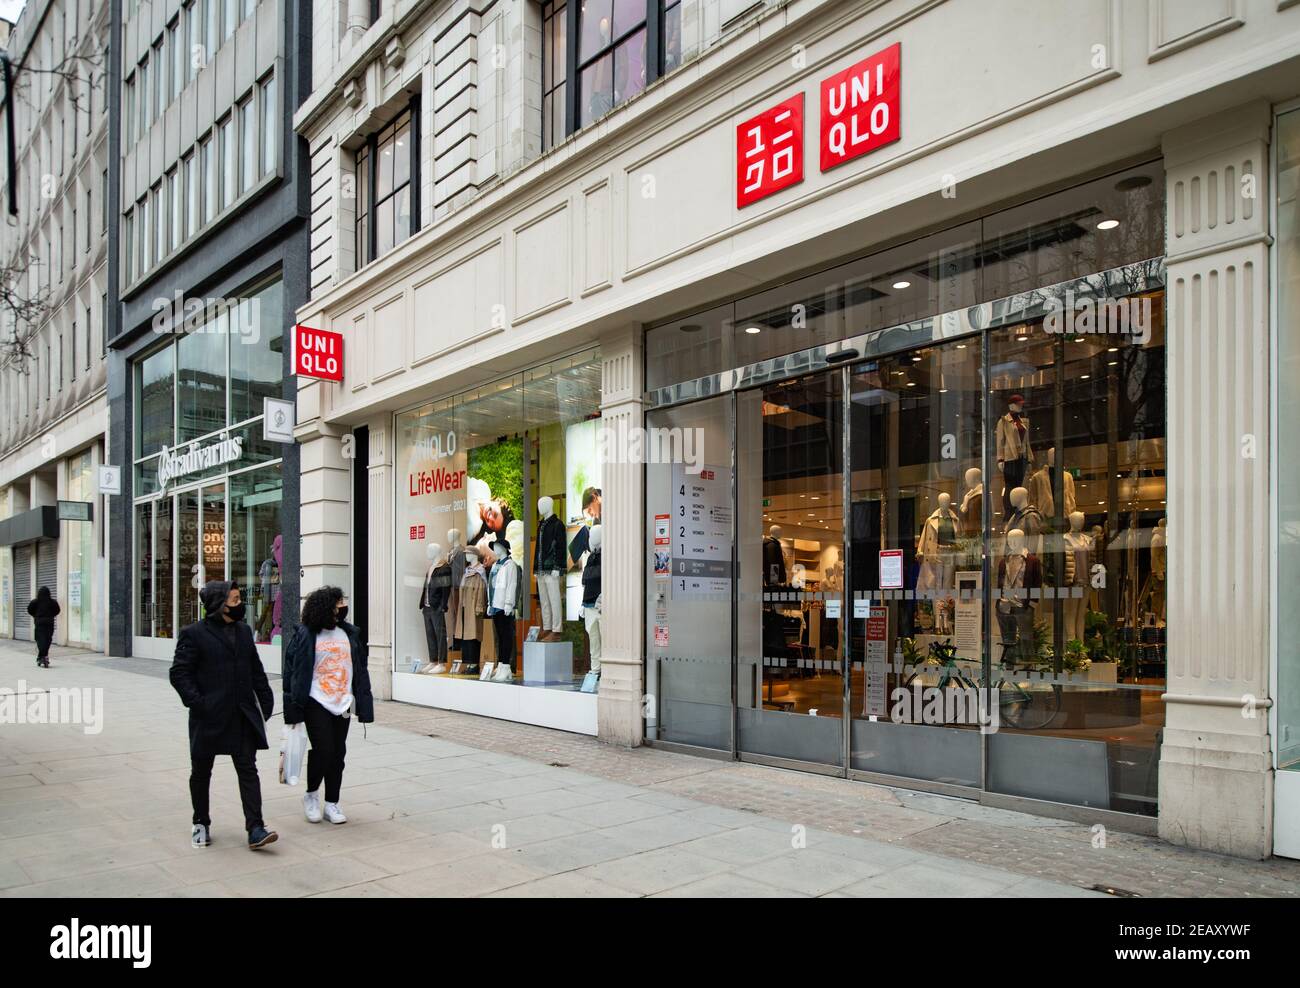 Uniqlo London Store High Resolution Stock Photography and Images - Alamy